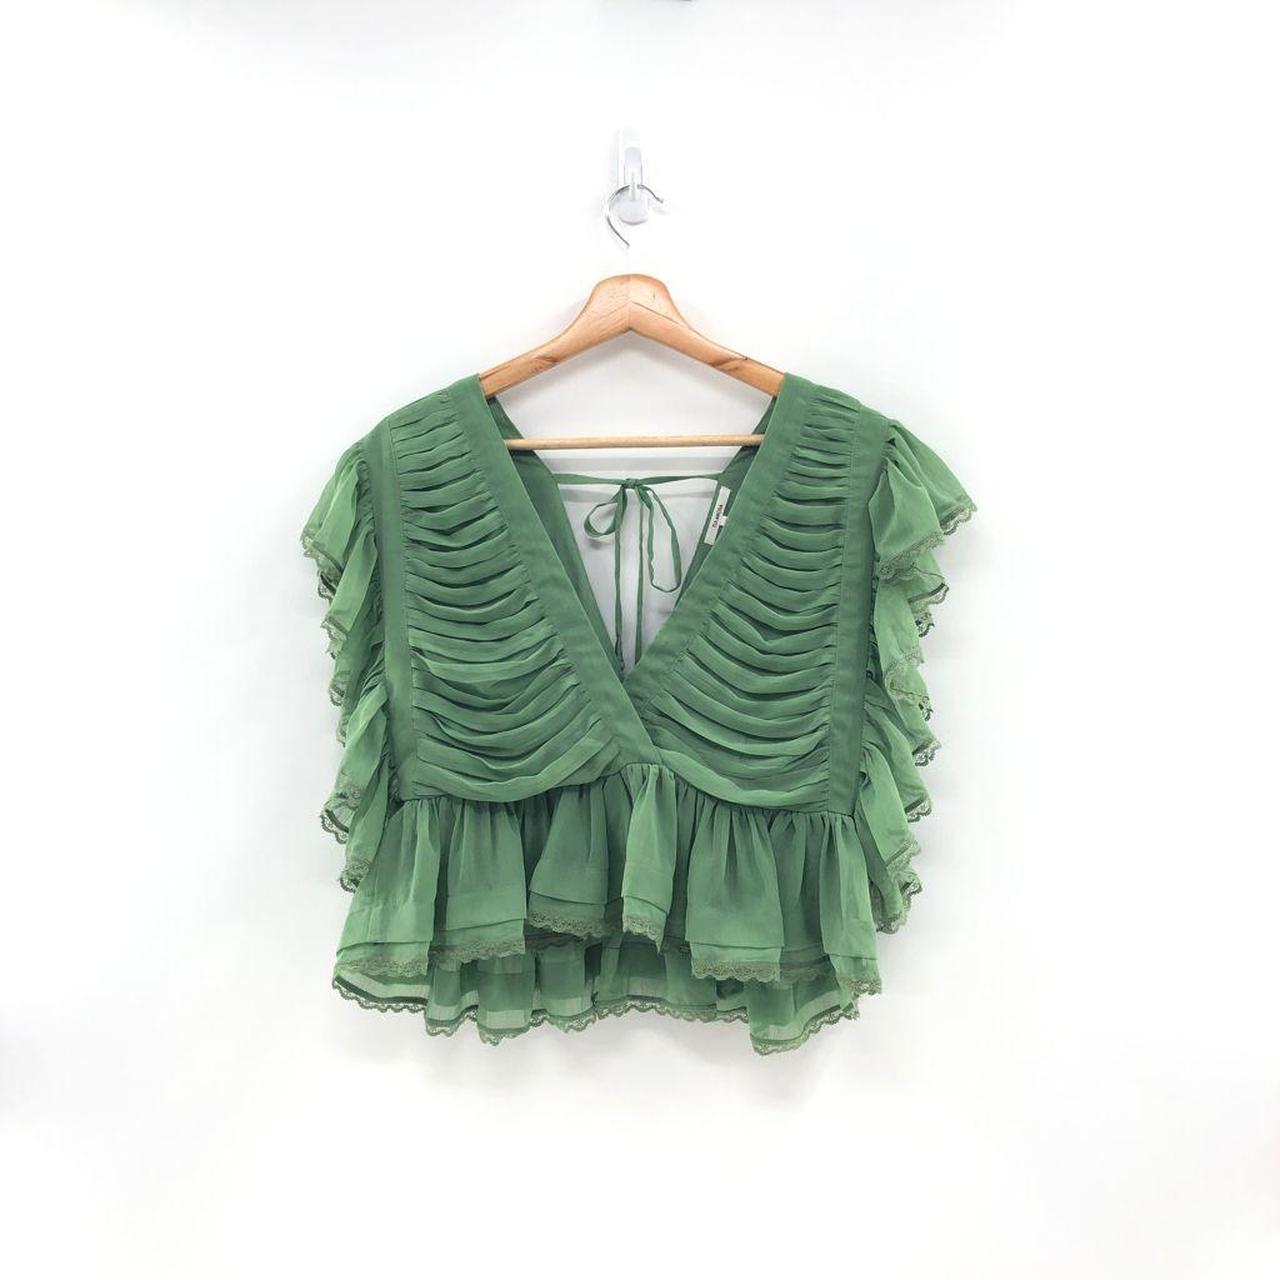 Product Image 1 - Tularosa Kaia Top in Mint
Size